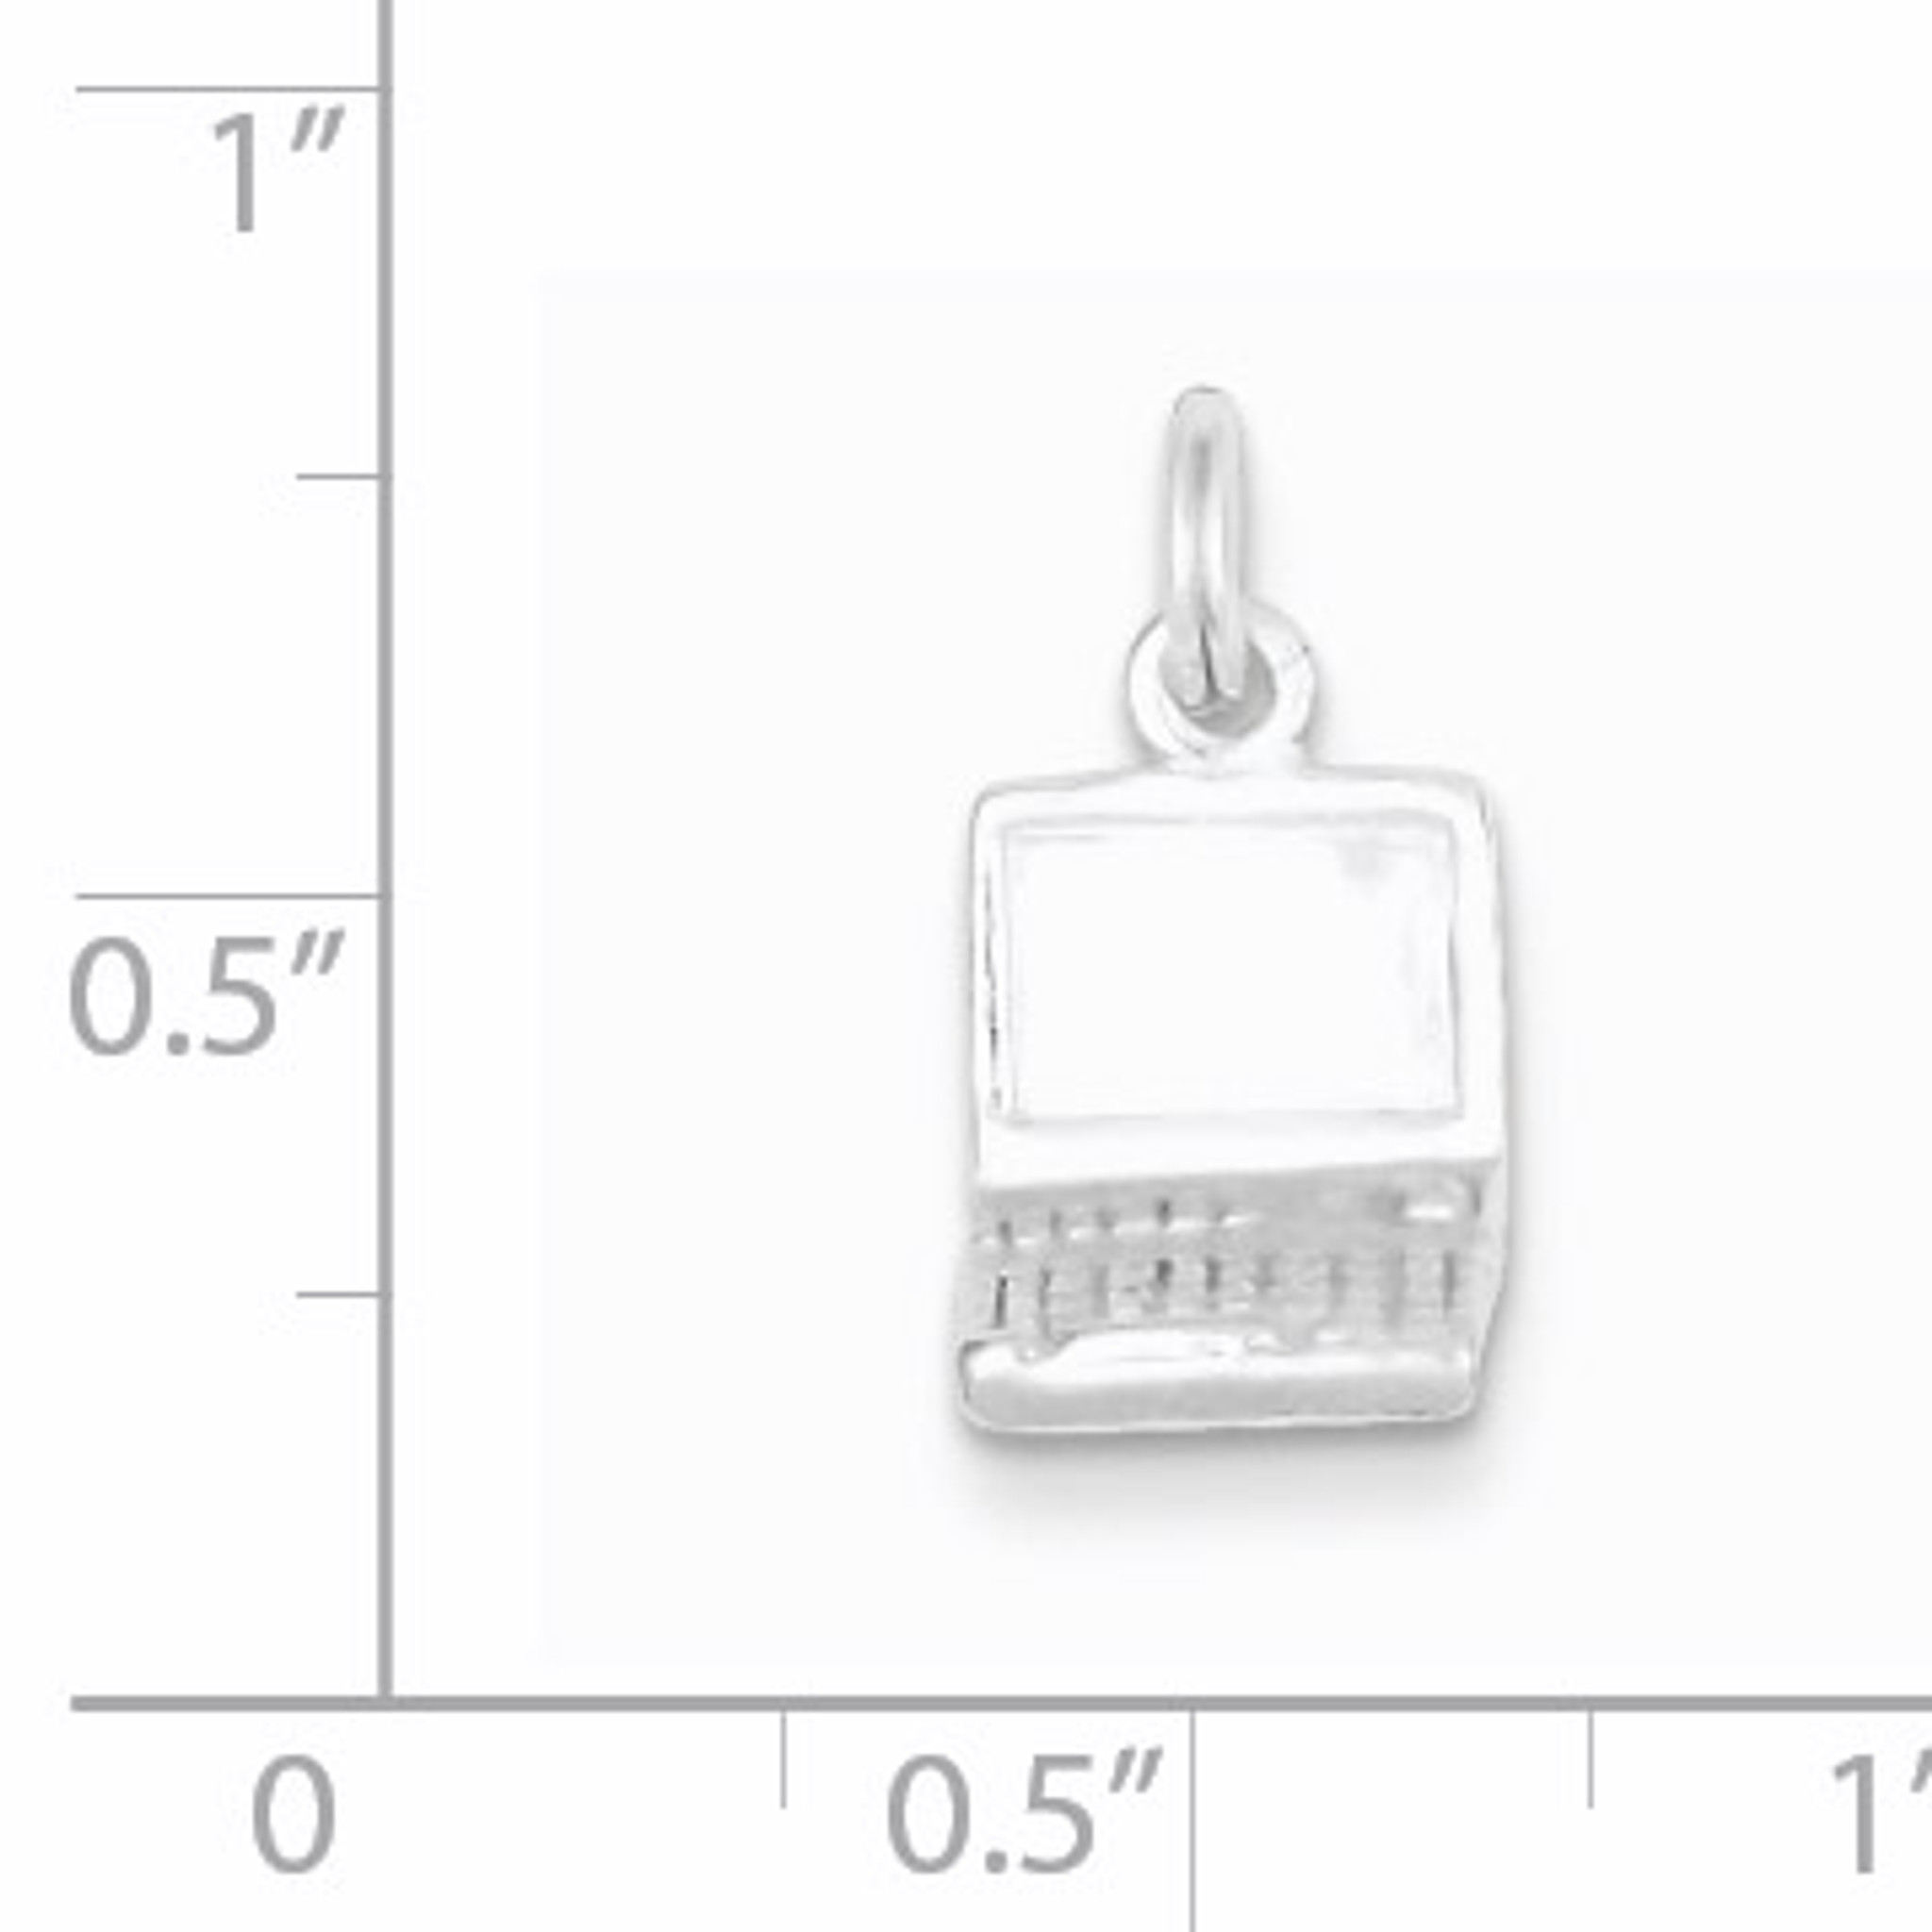 Solid 925 Sterling Silver Laptop Charm Pendant 20mm x 10mm 